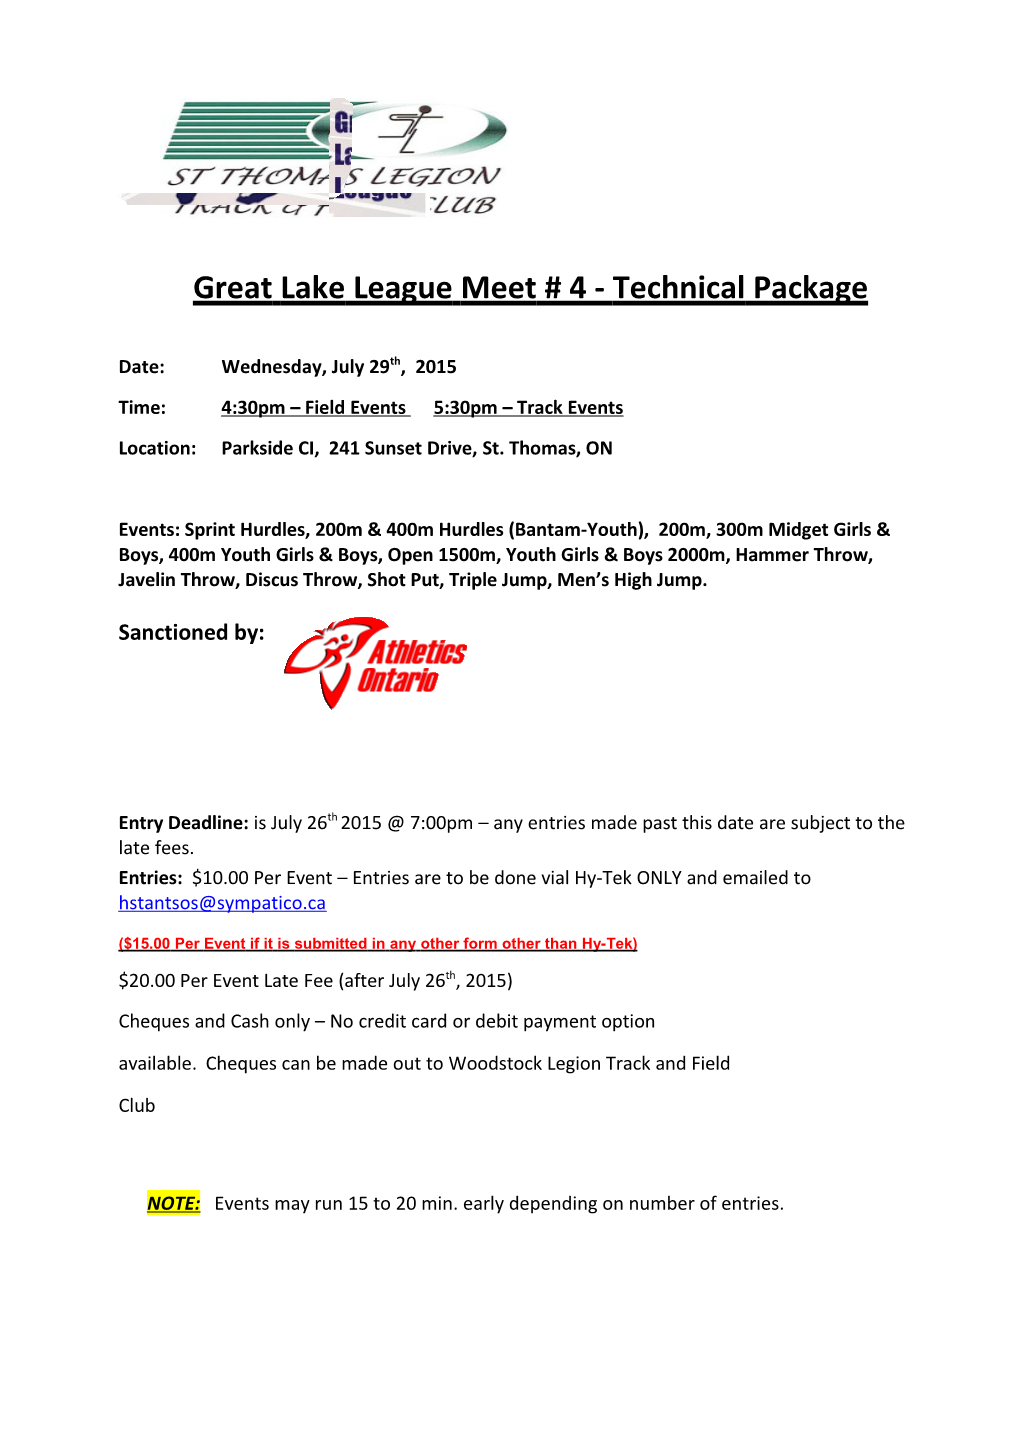 Great Lake League Meet # 3 Technical Package